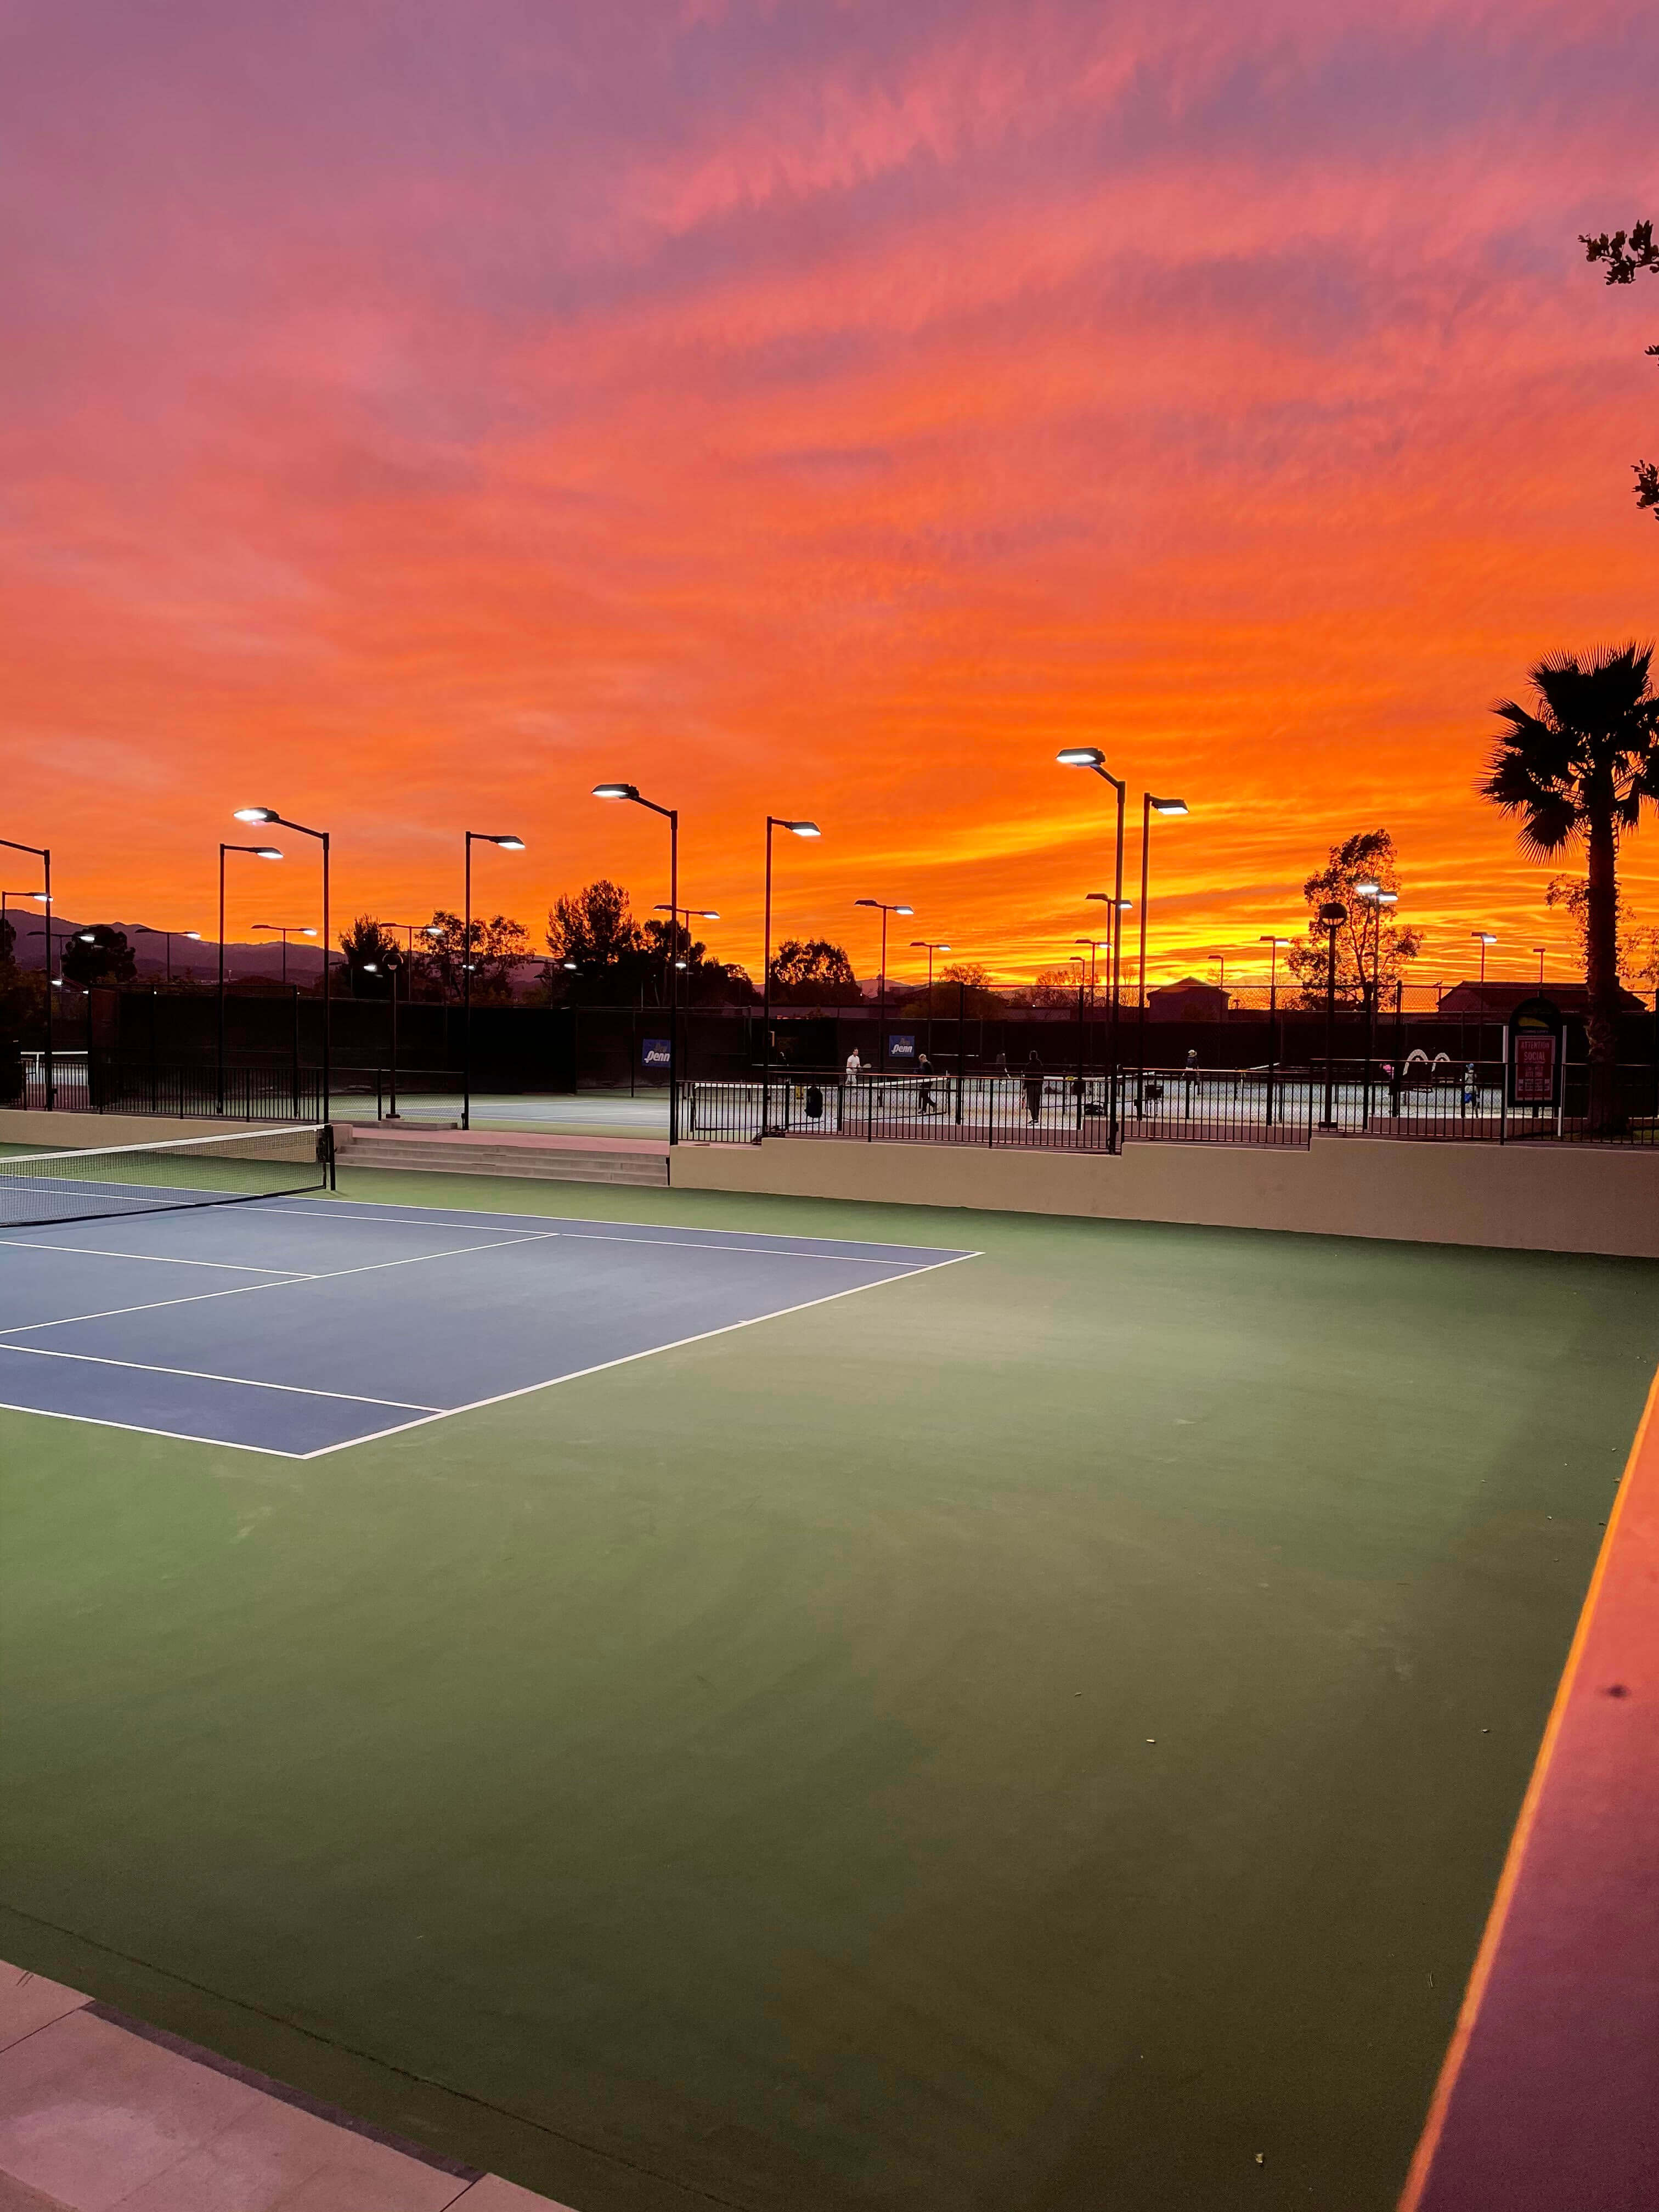 What tennis drills for adults are at the Paseo Club?